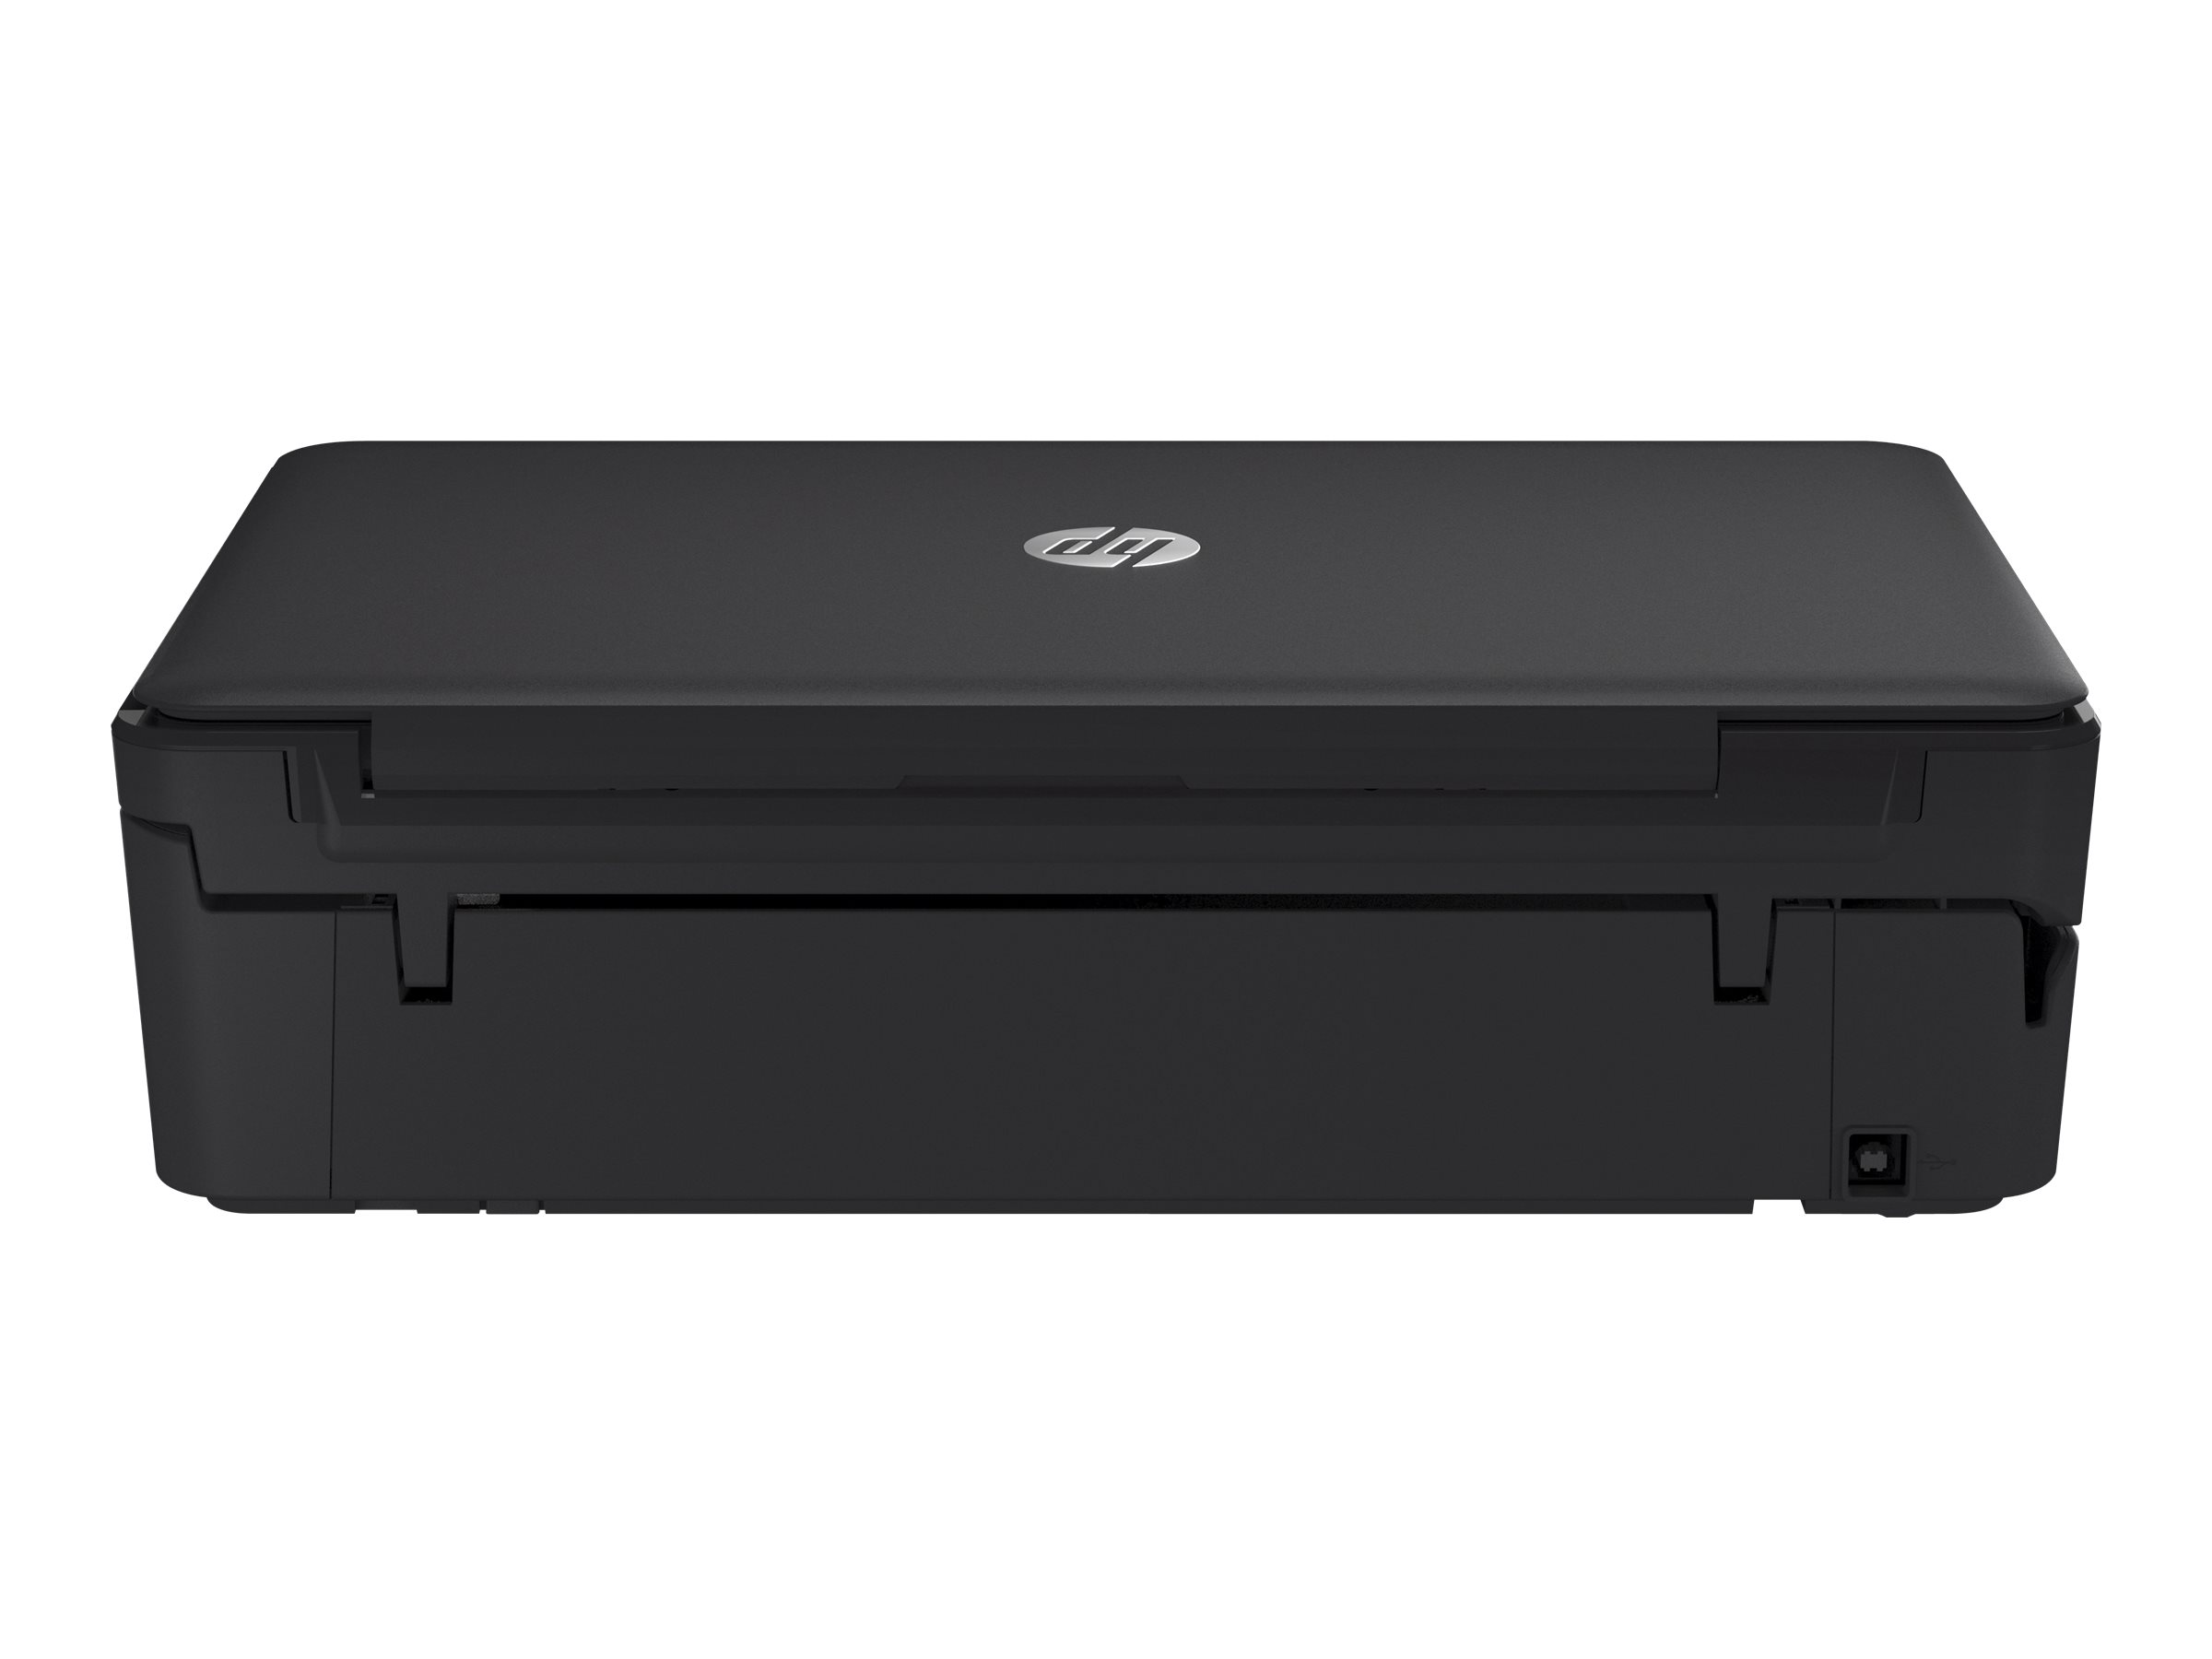 HP ENVY 4502 e-All-in-One - Multifunction printer - color - ink-jet - Legal (8.5 in x 14 in)/A4 (8.25 in x 11.7 in) (original) - A4/Legal (media) - up to 6 ppm (copying) - up to 8.8 ppm (printing) - 100 sheets - USB 2.0, Wi-Fi(n) - image 5 of 5